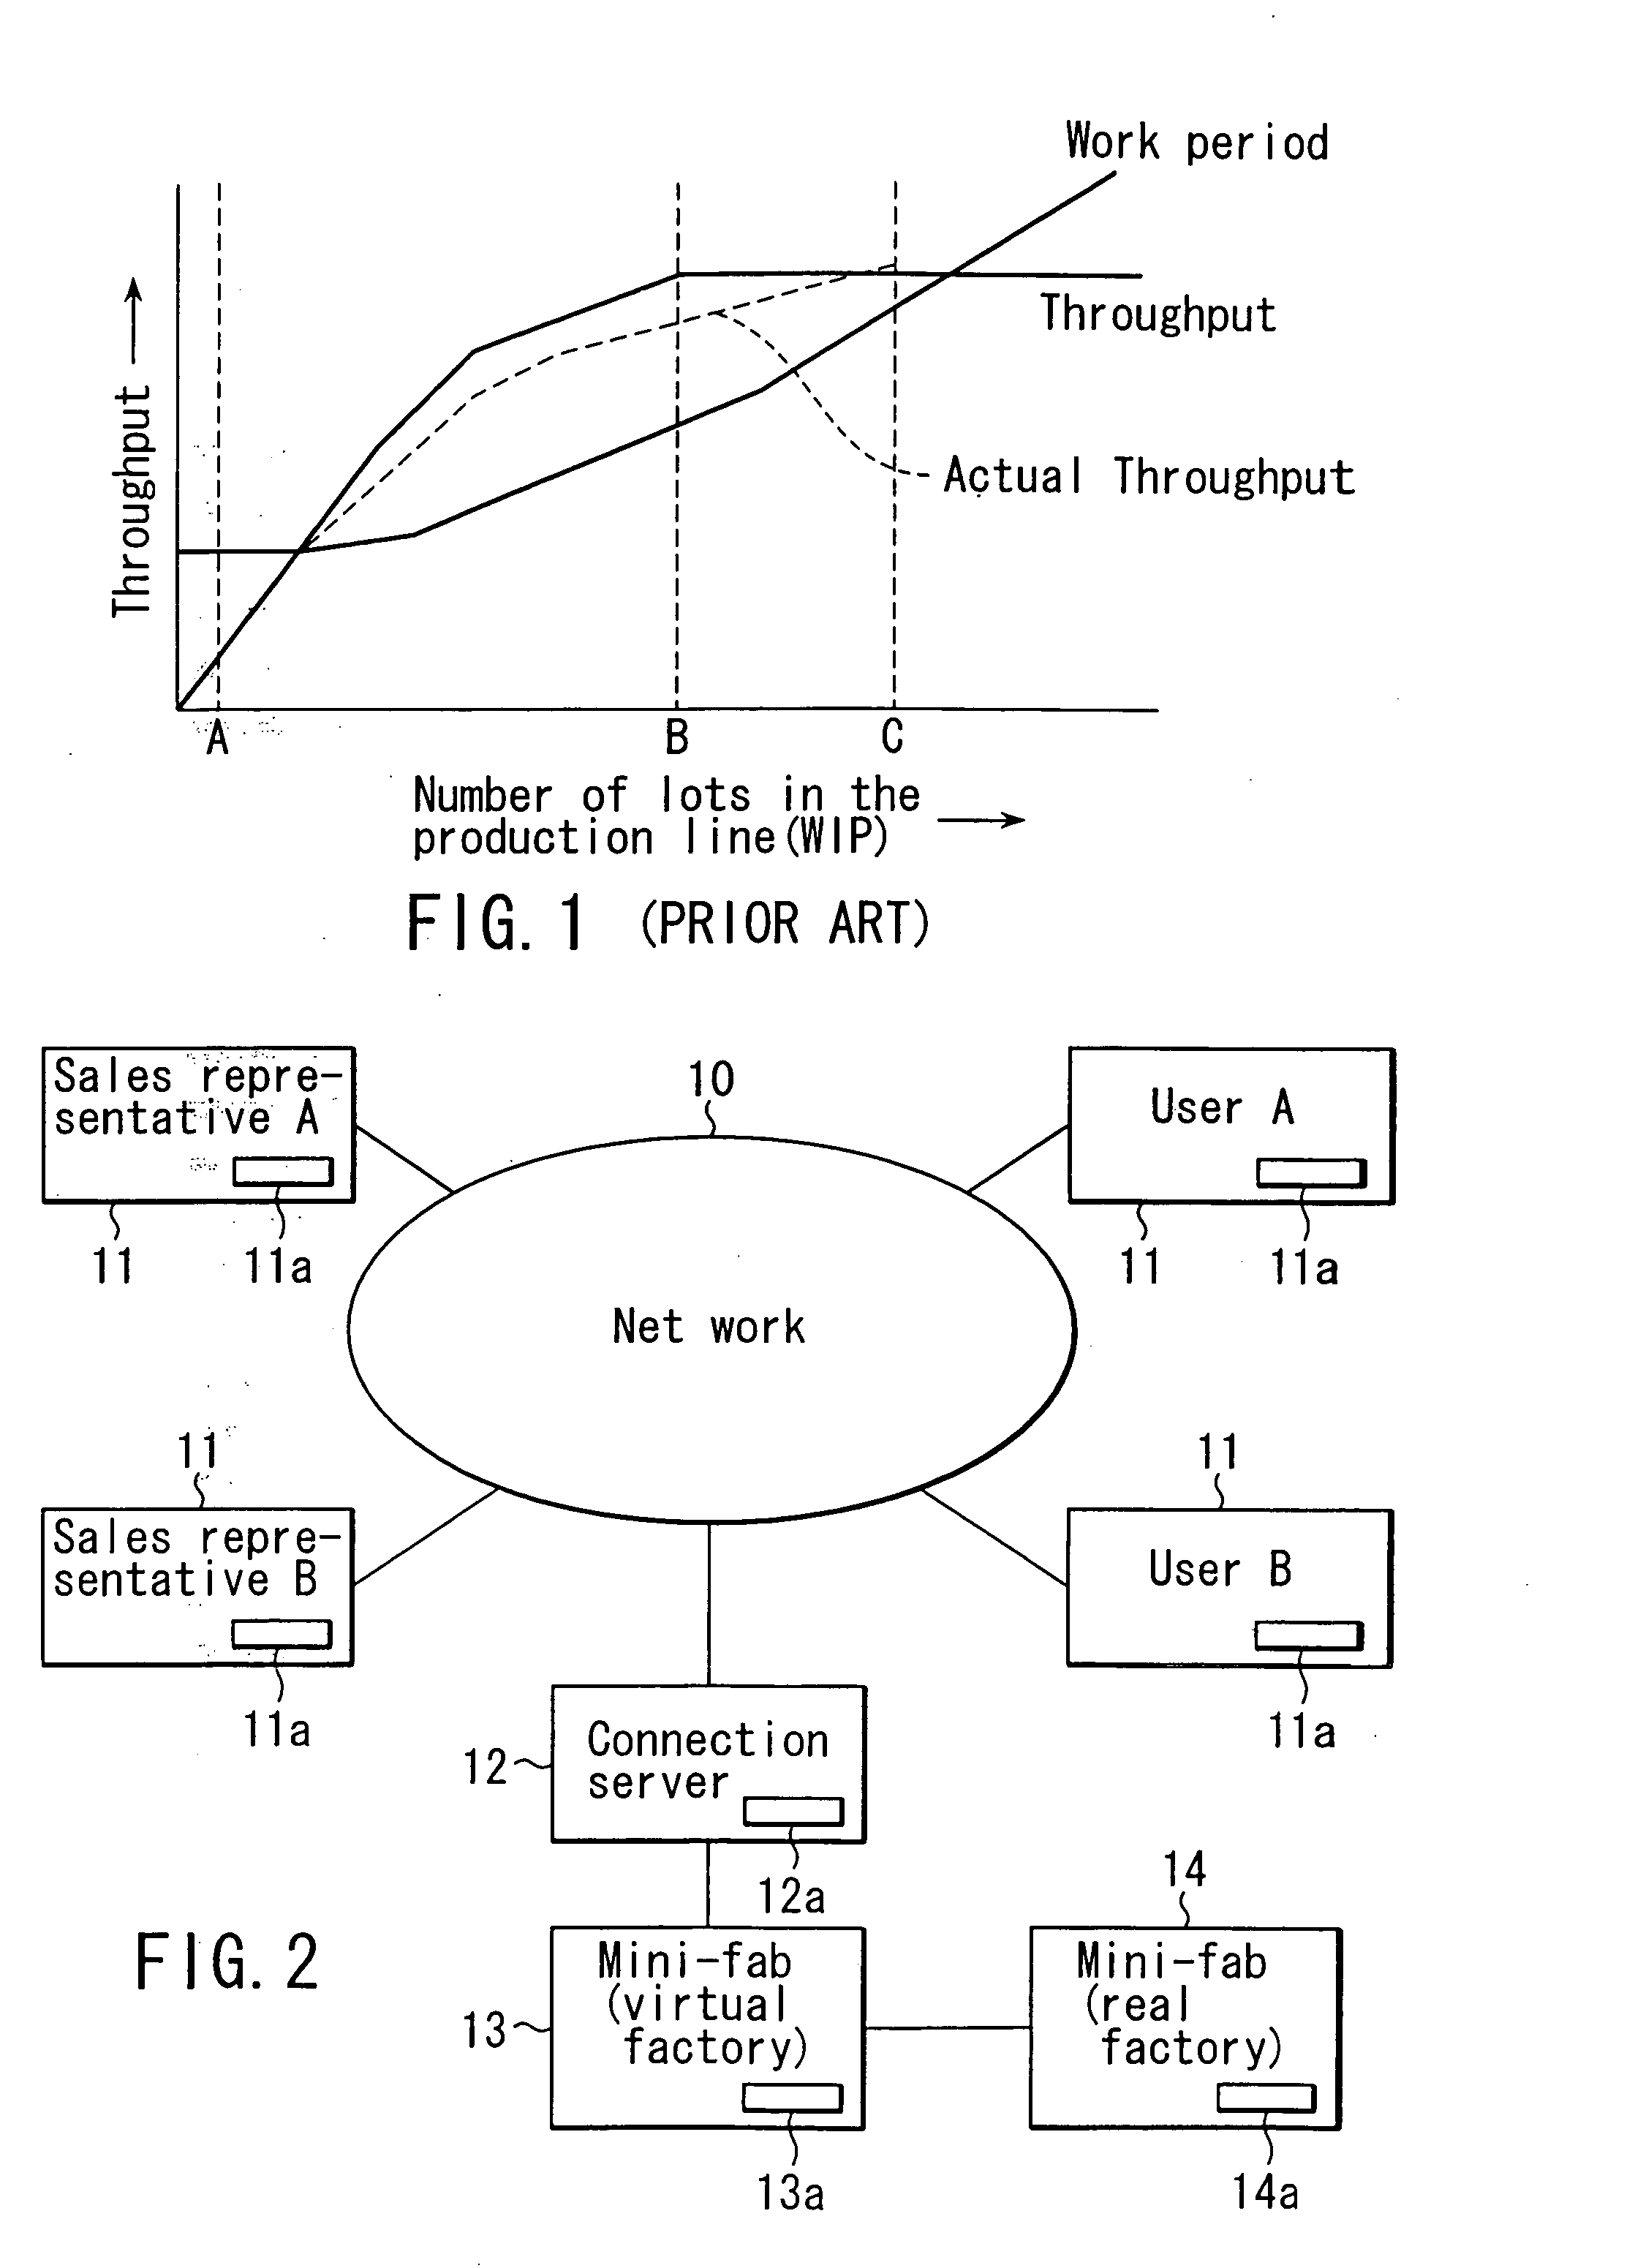 Electronic commerce method for semiconductor products, electronic commerce thereof, production system, production method, production equipment design system, production equipment design method, and production equipment manufacturing method